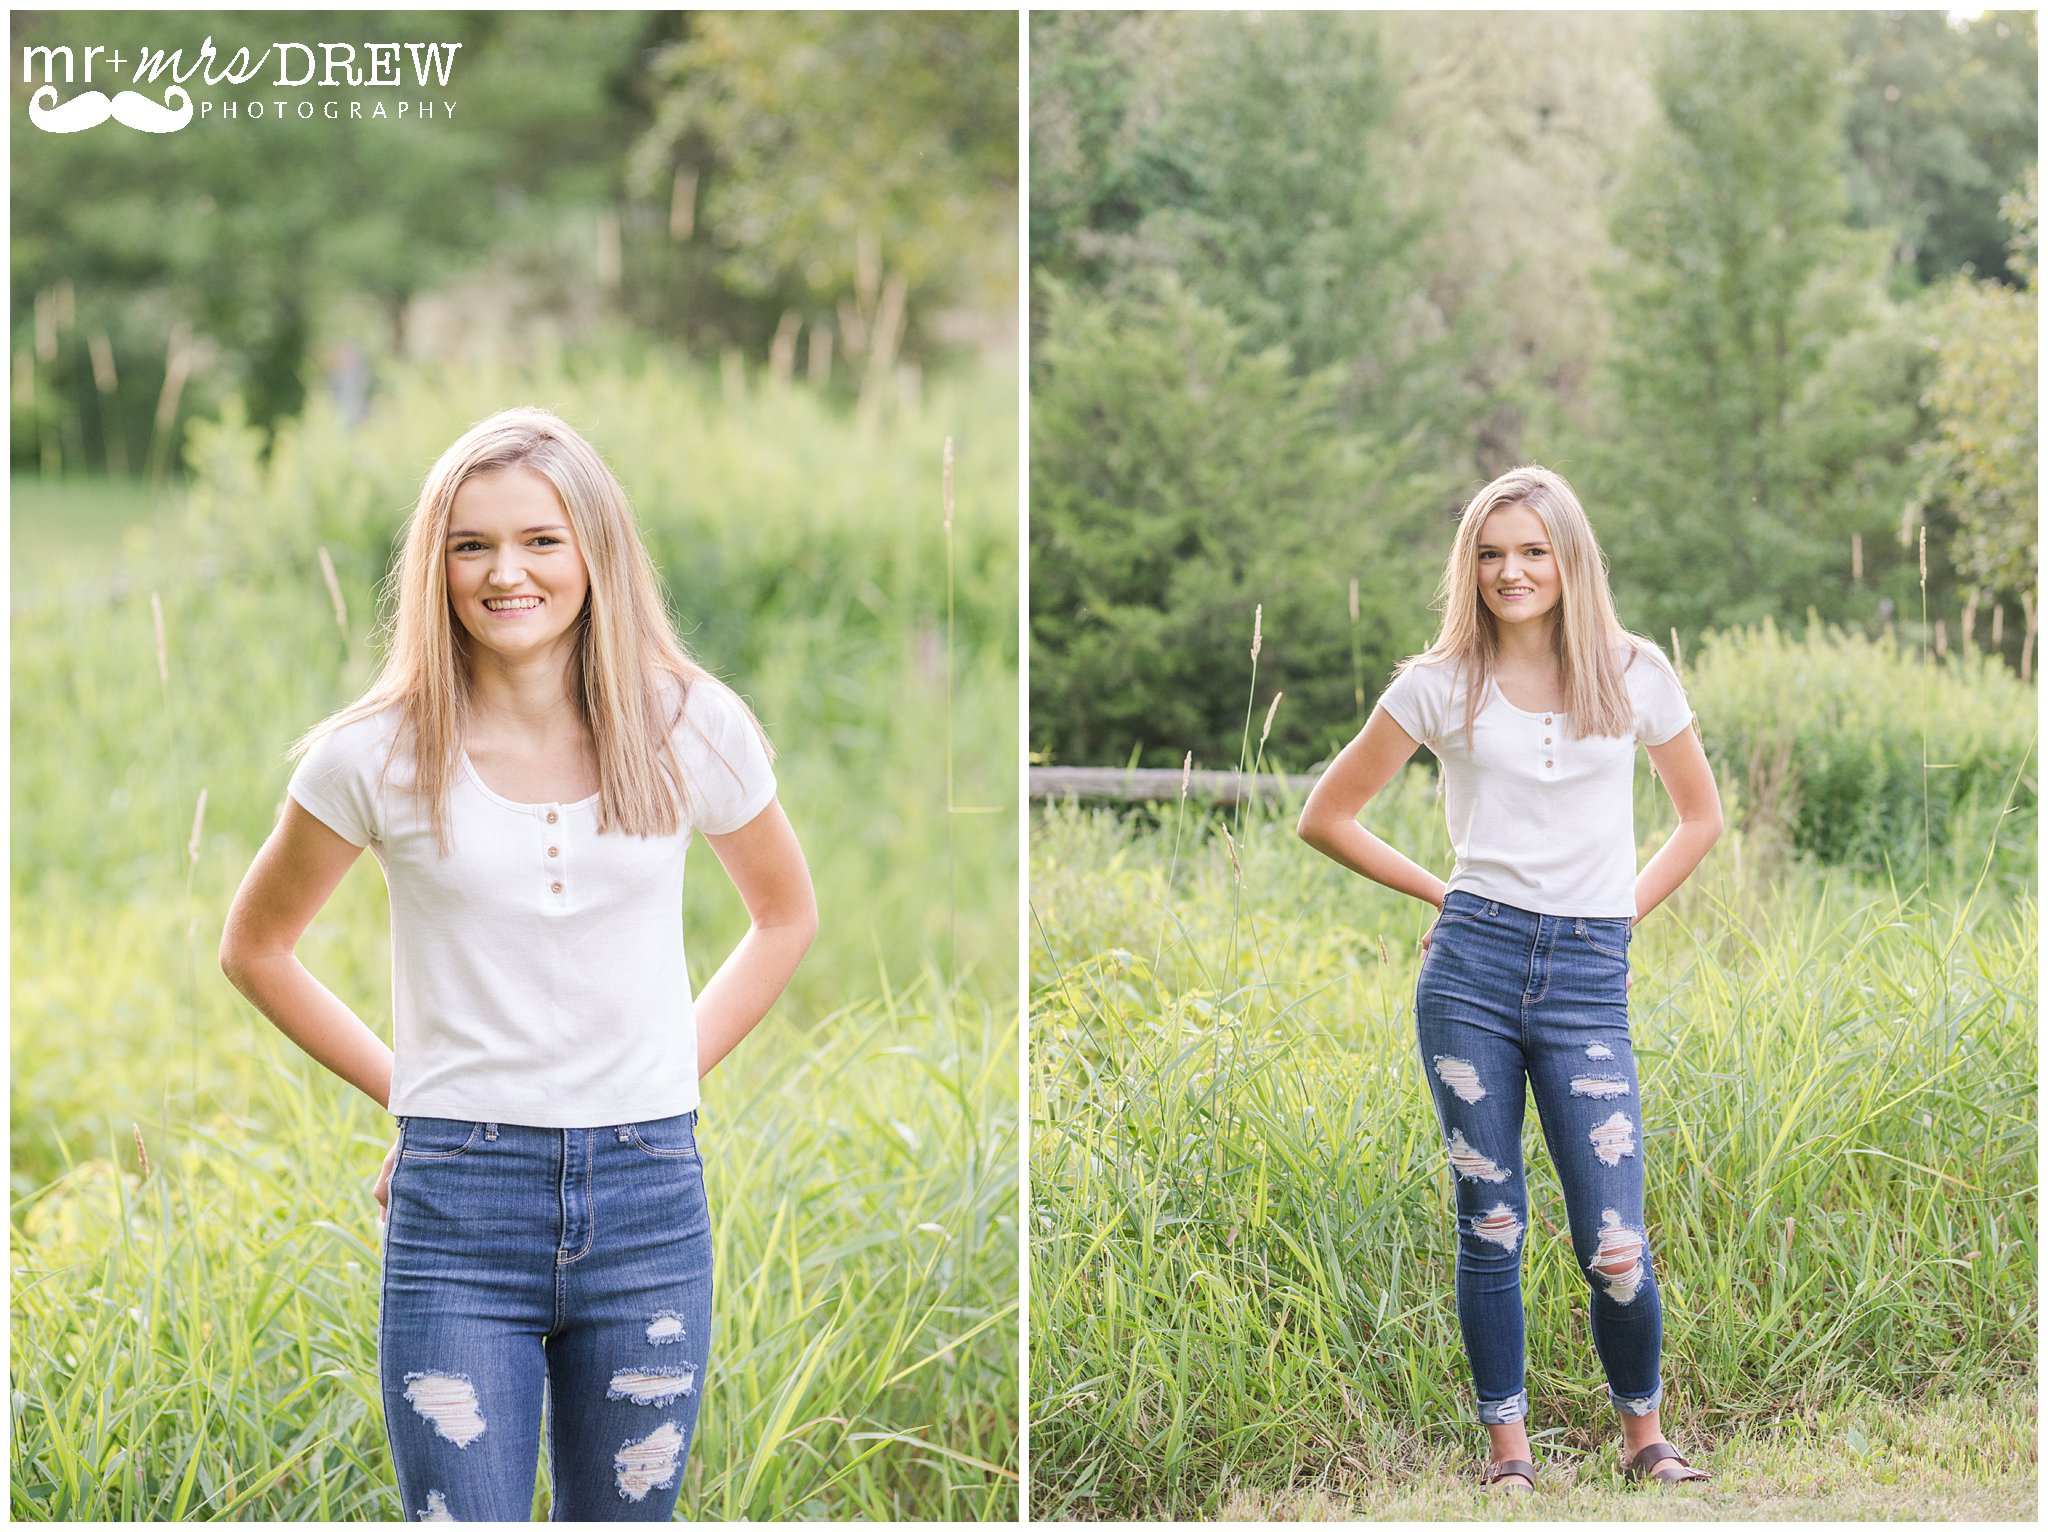 Senior Portrait of girl in white t-shirt & ripped jeans with hands on hip.